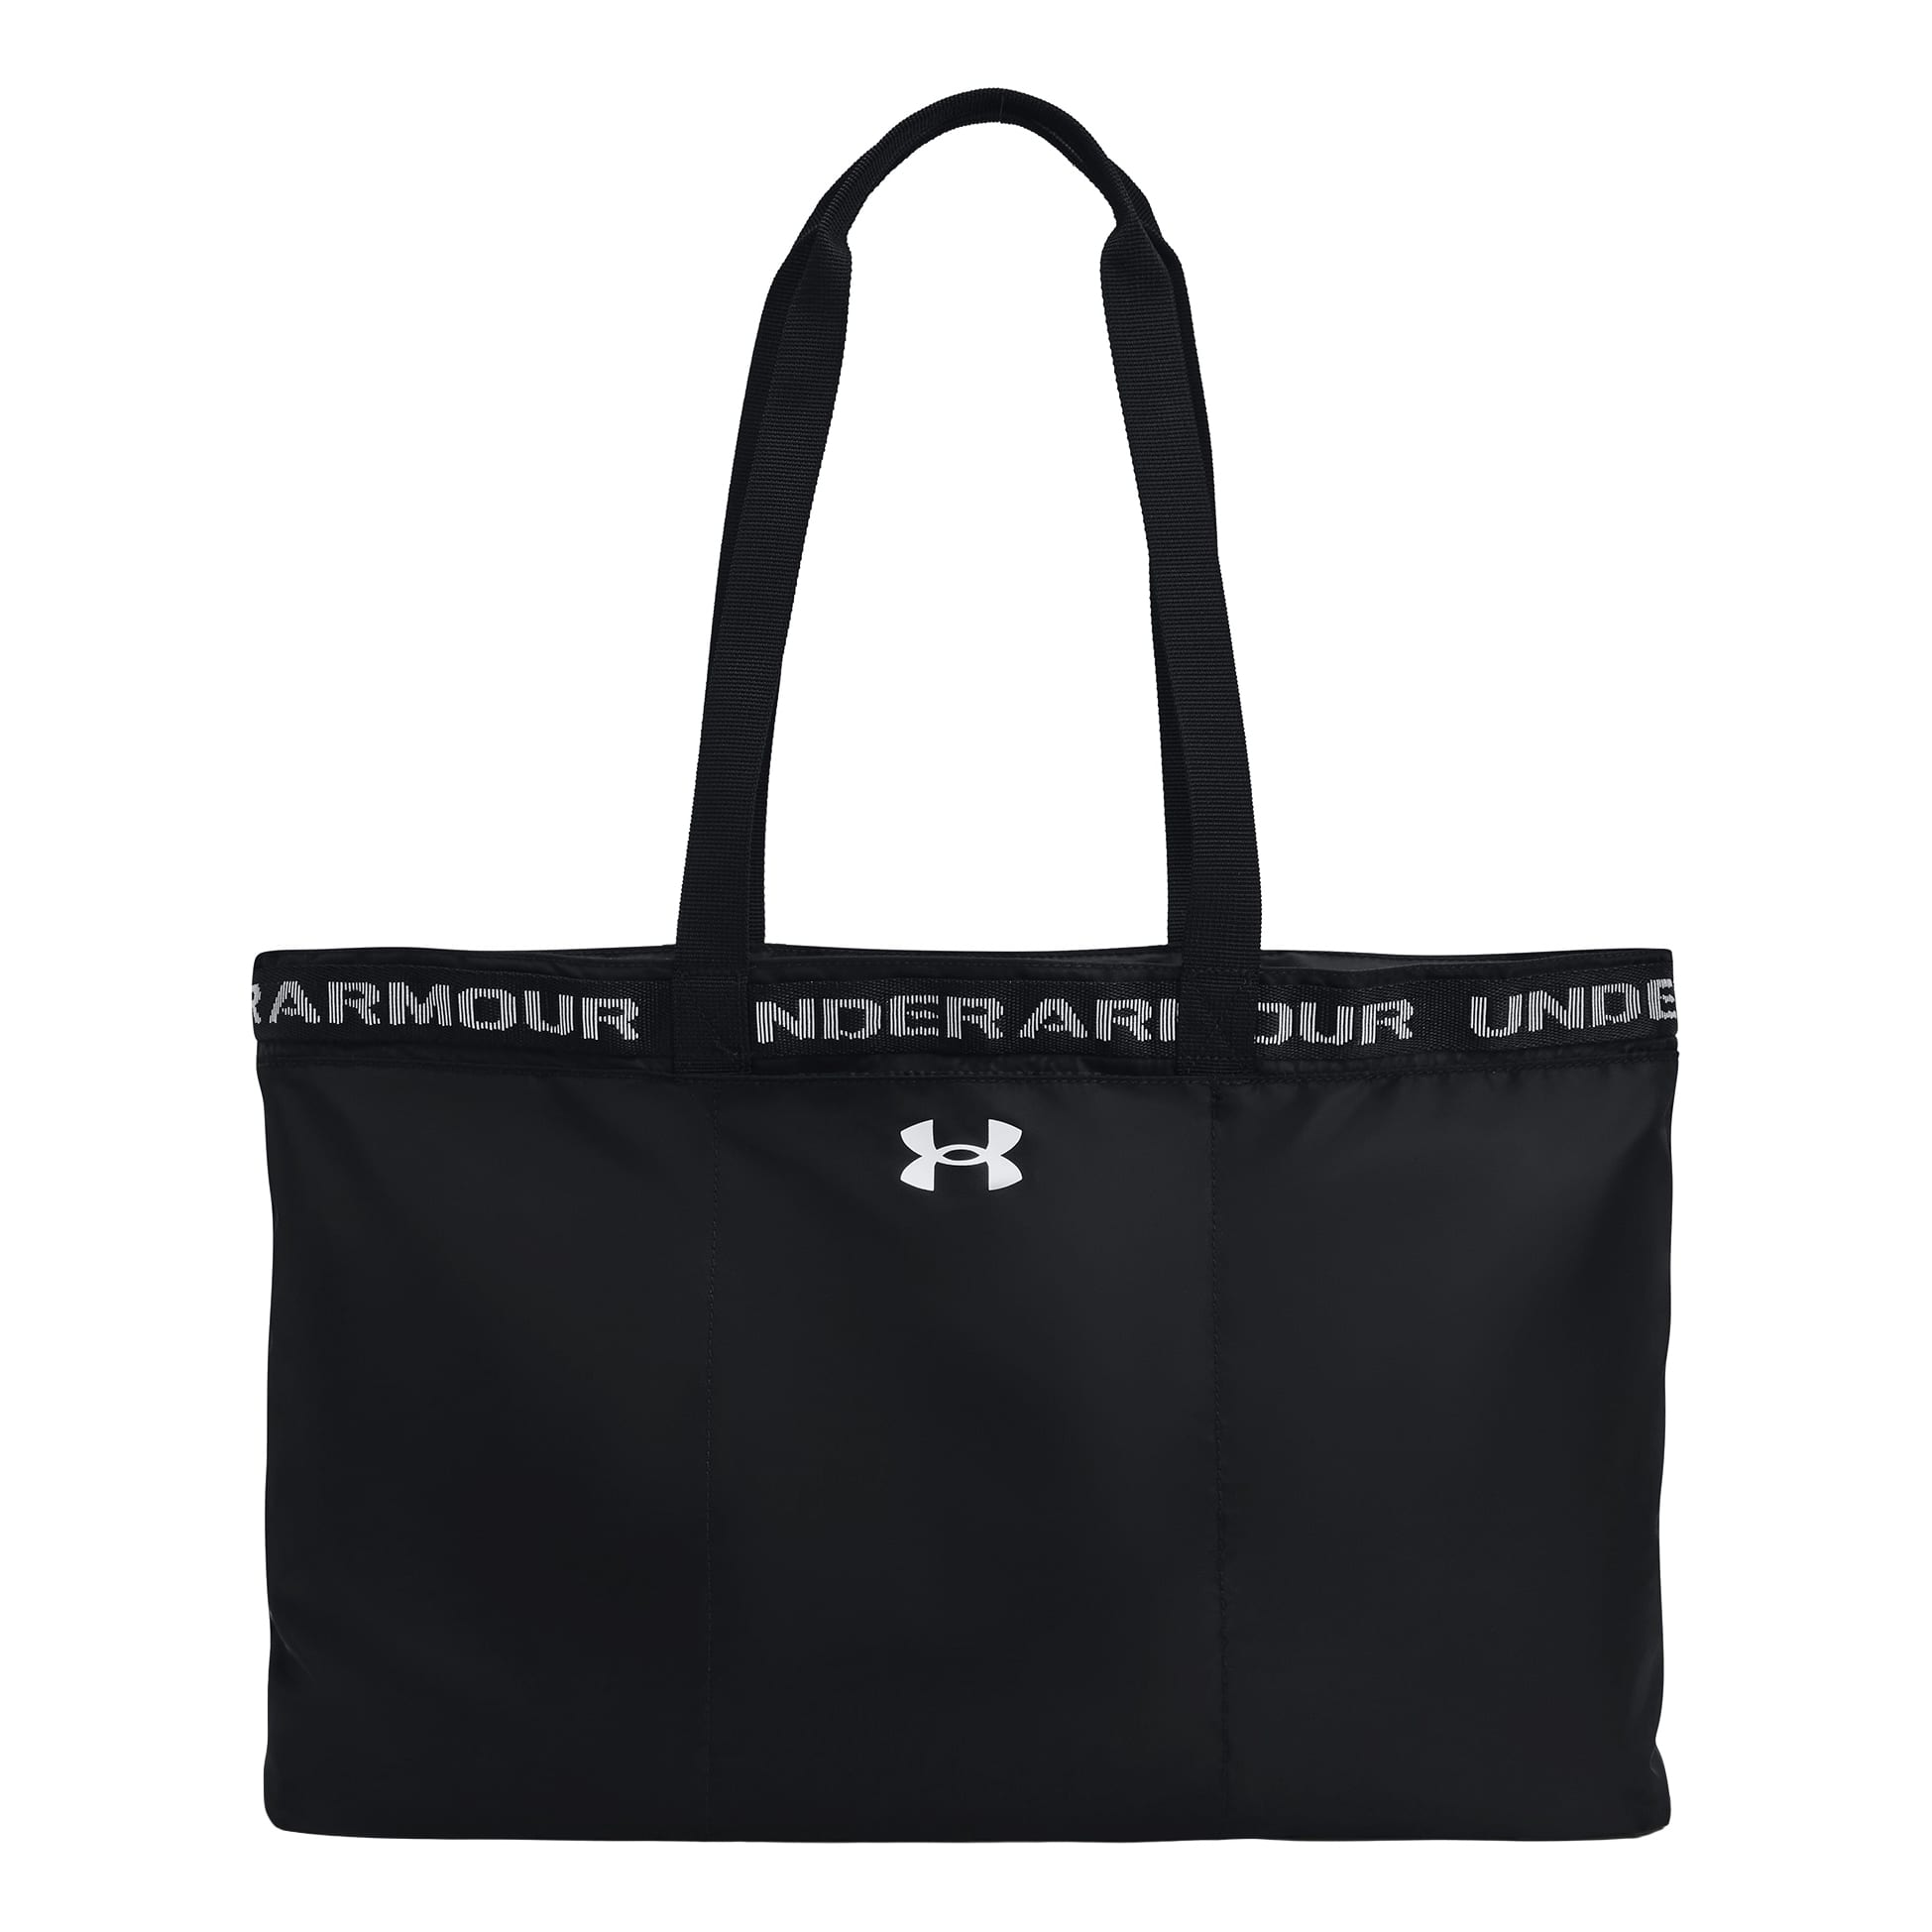 Under Armour® Women’s Favorite Tote Bag